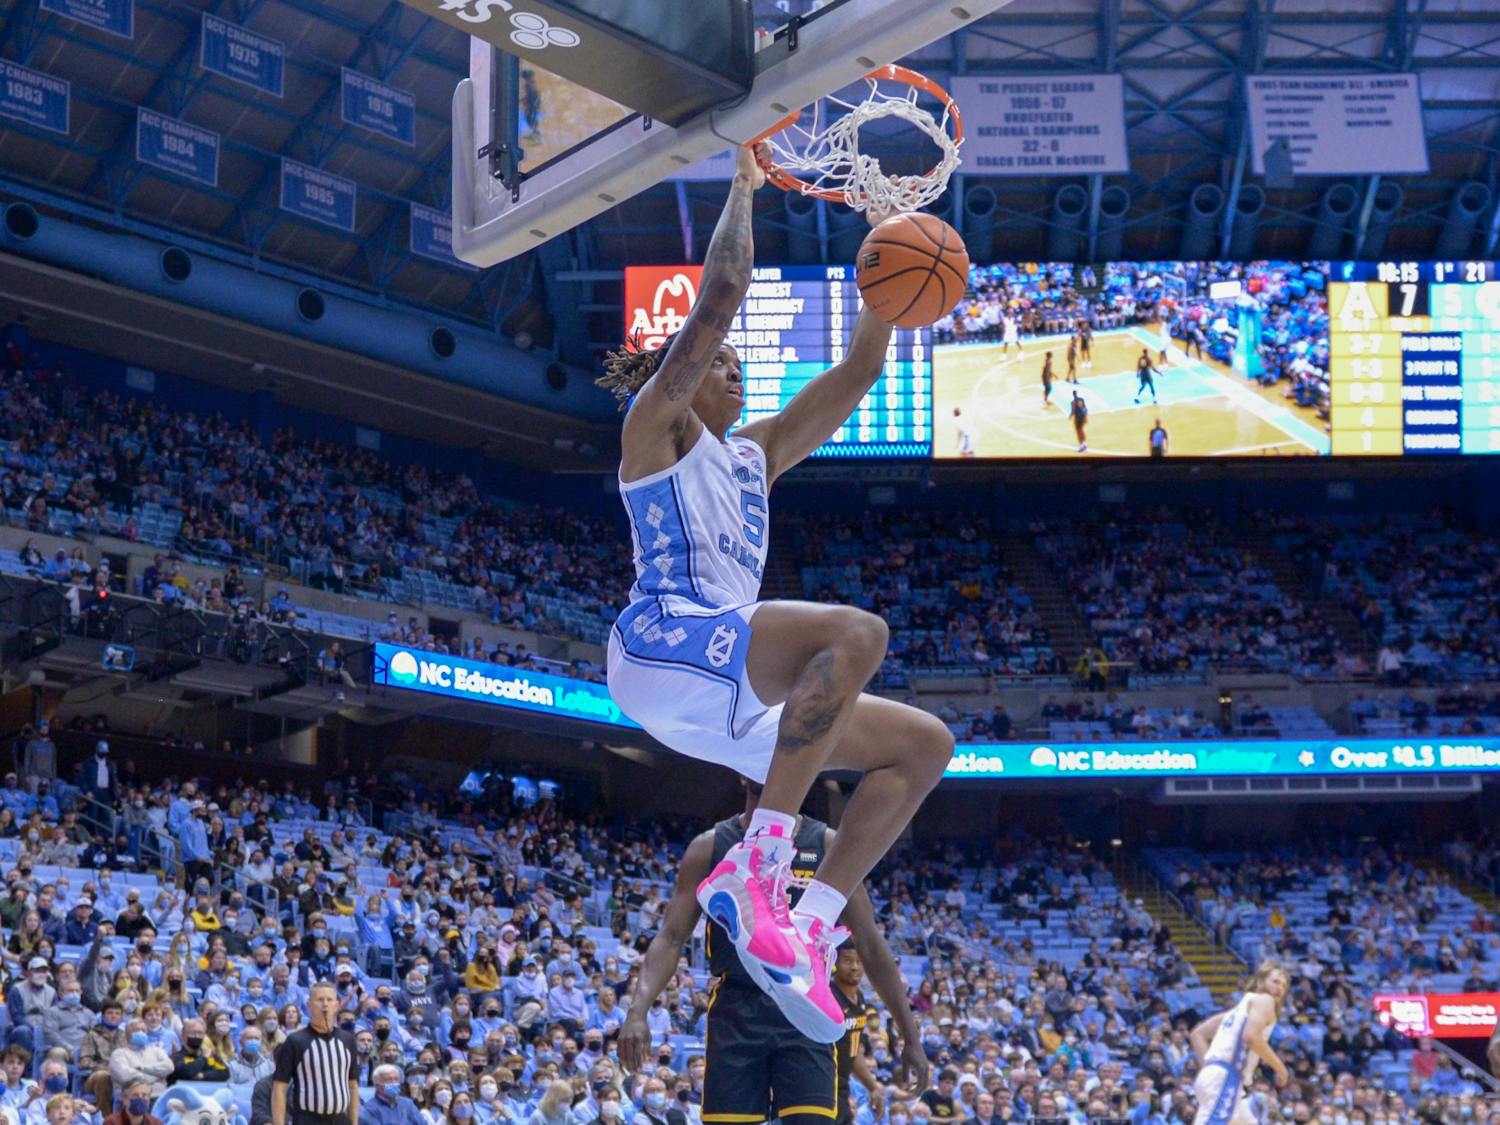 Junior forward/center Armando Bacot (5) scores a point against App State in the Dean E. Smith Center on Dec 21, 2021.